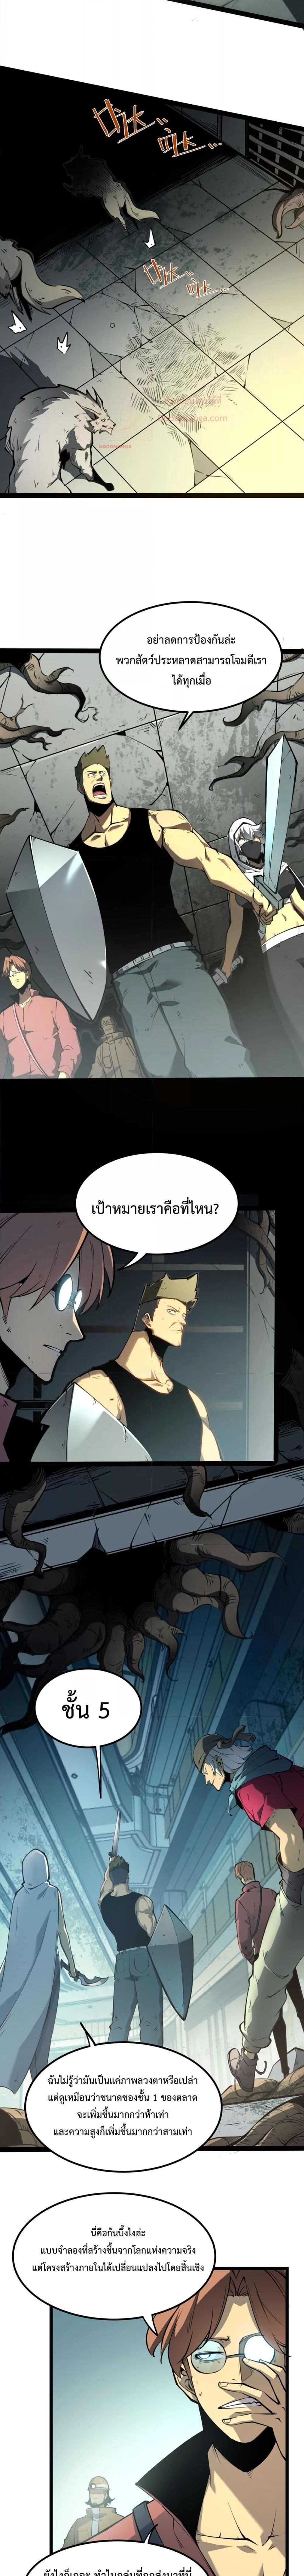 I Became The King by Scavenging โ€“ เนเธเนเธฅเน เน€เธฅเน€เธงเนเธฅเธฅเธฃเธดเนเธ เธ•เธญเธเธ—เธตเน 1 (17)